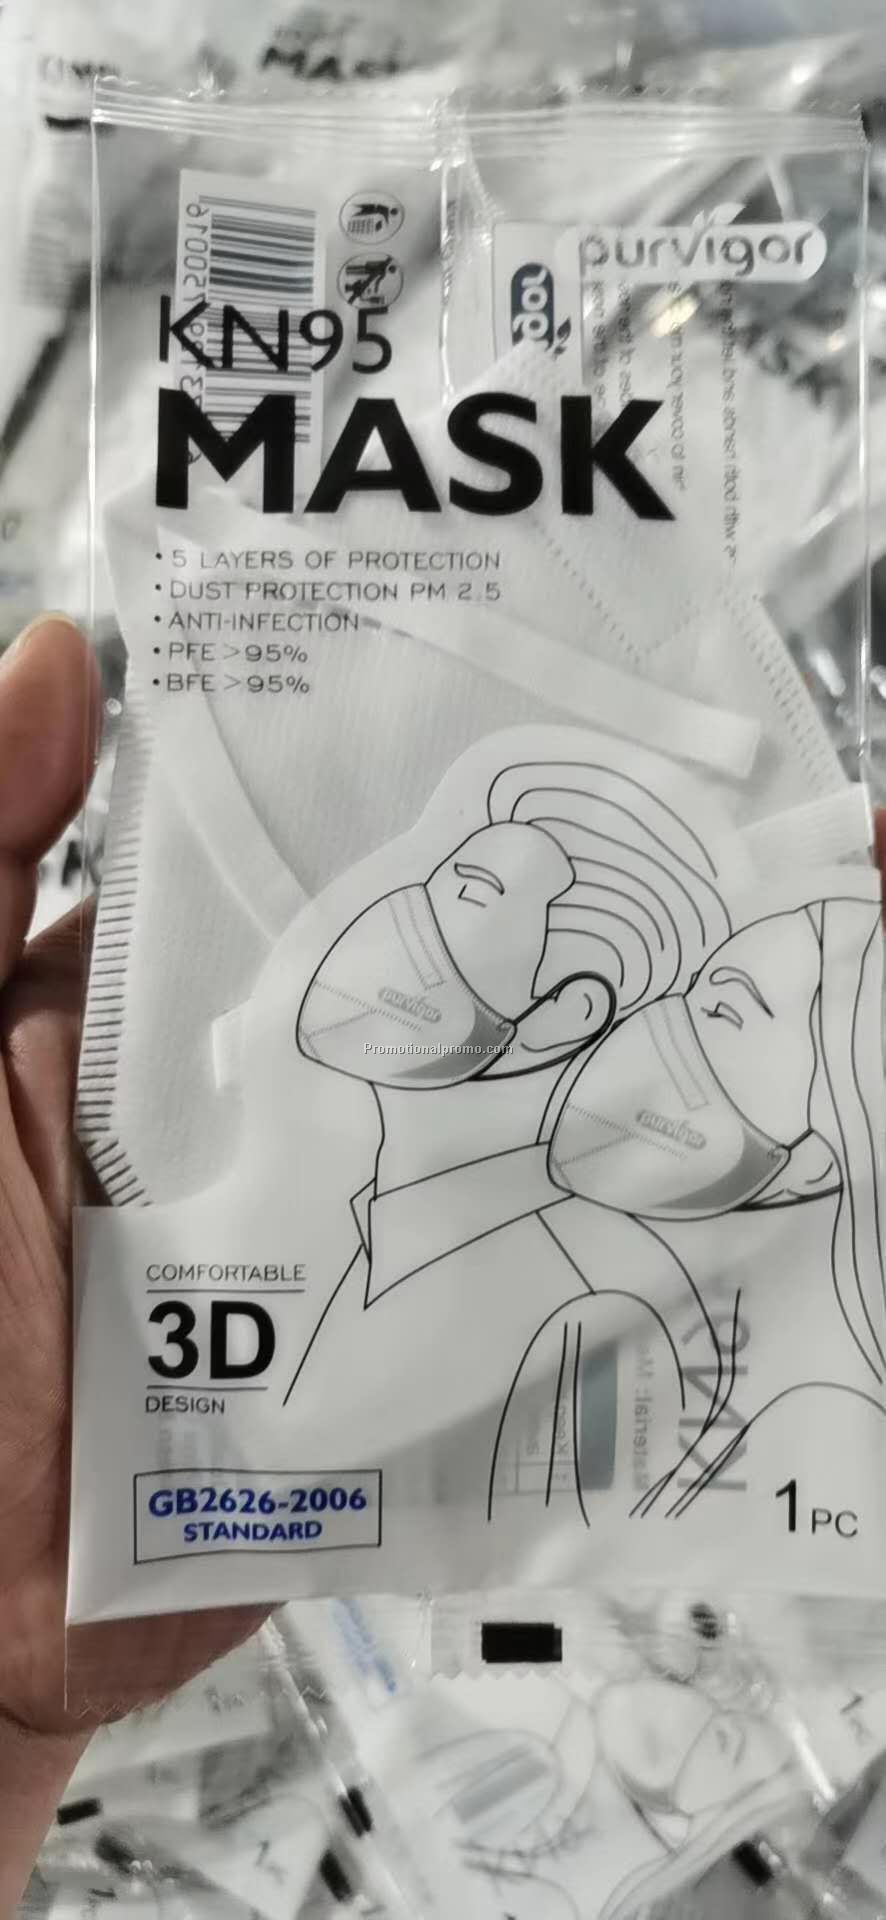 FDA approved KN95/N95 face mask